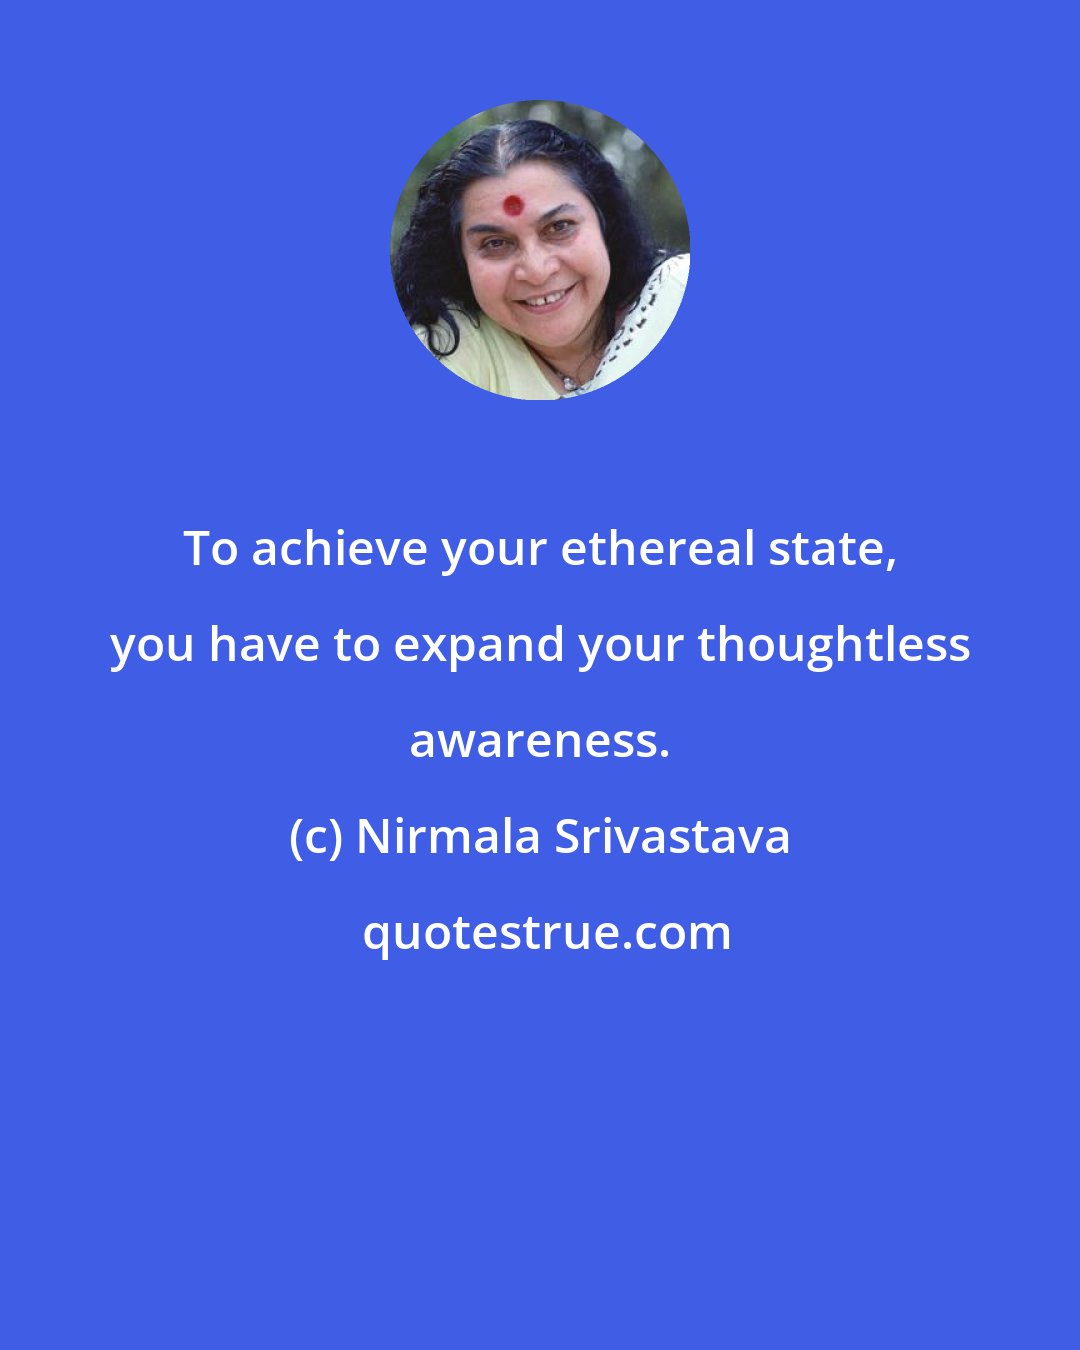 Nirmala Srivastava: To achieve your ethereal state, you have to expand your thoughtless awareness.